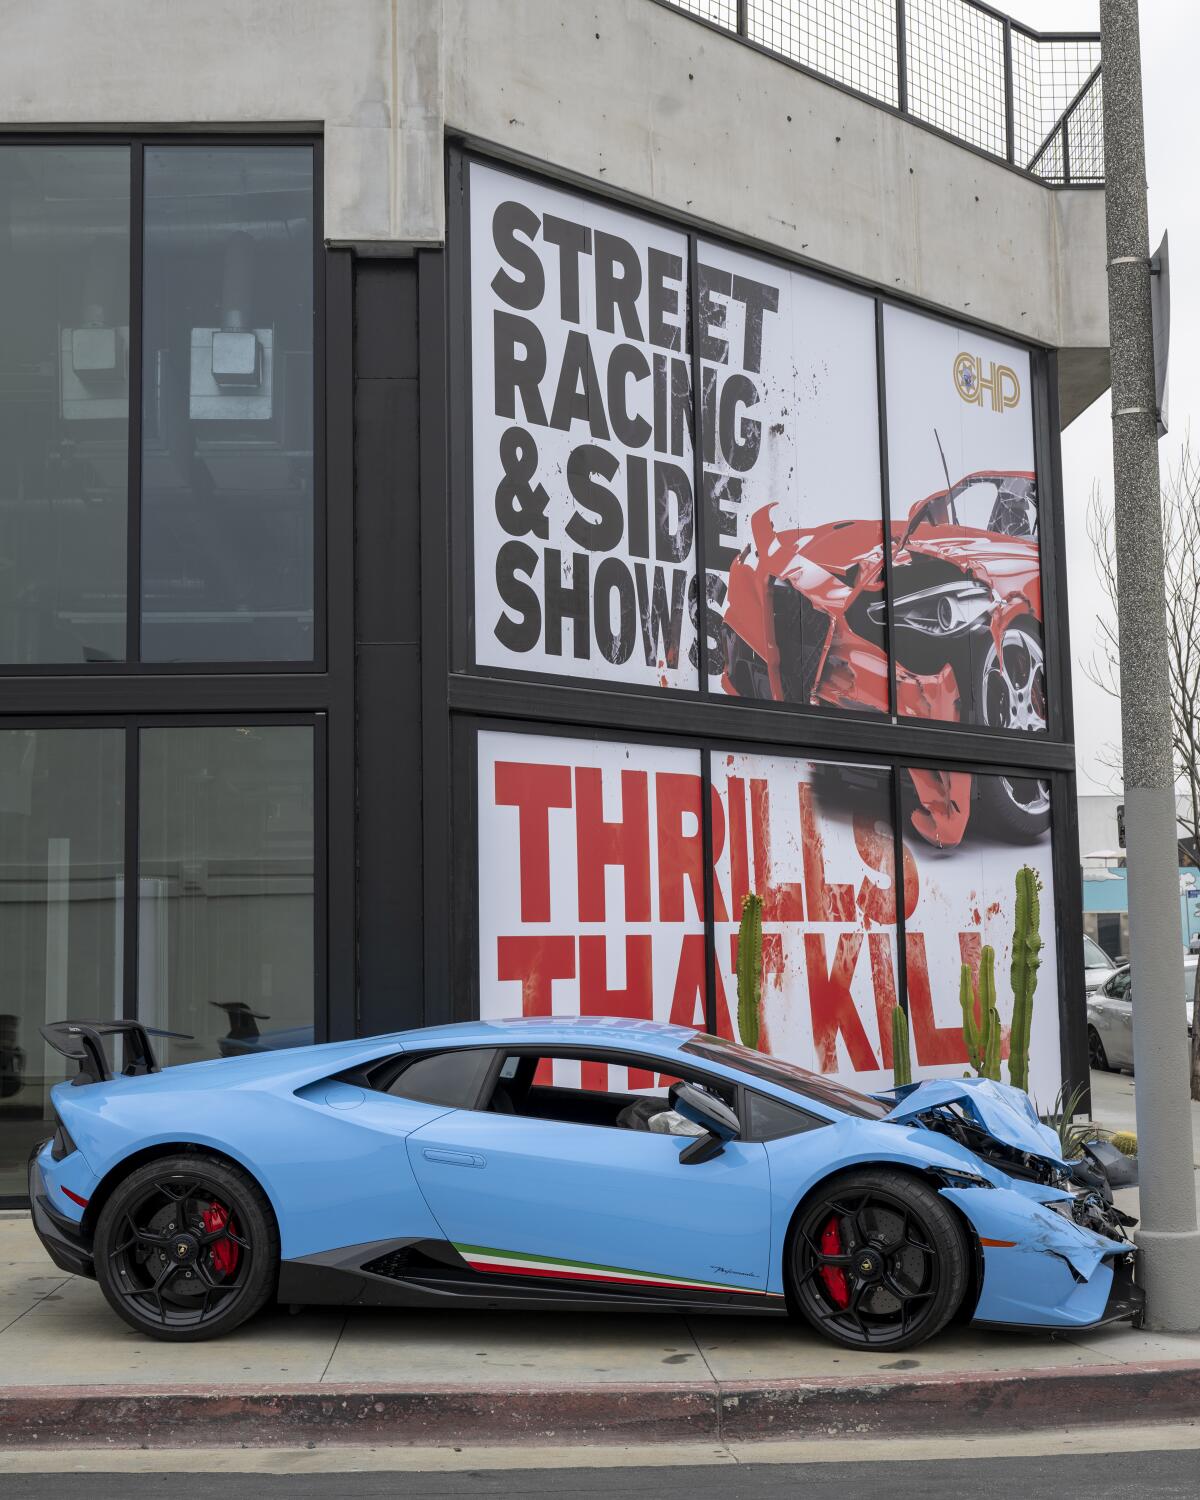 A wrecked powder blue Lamborghini staged on Melrose Avenue